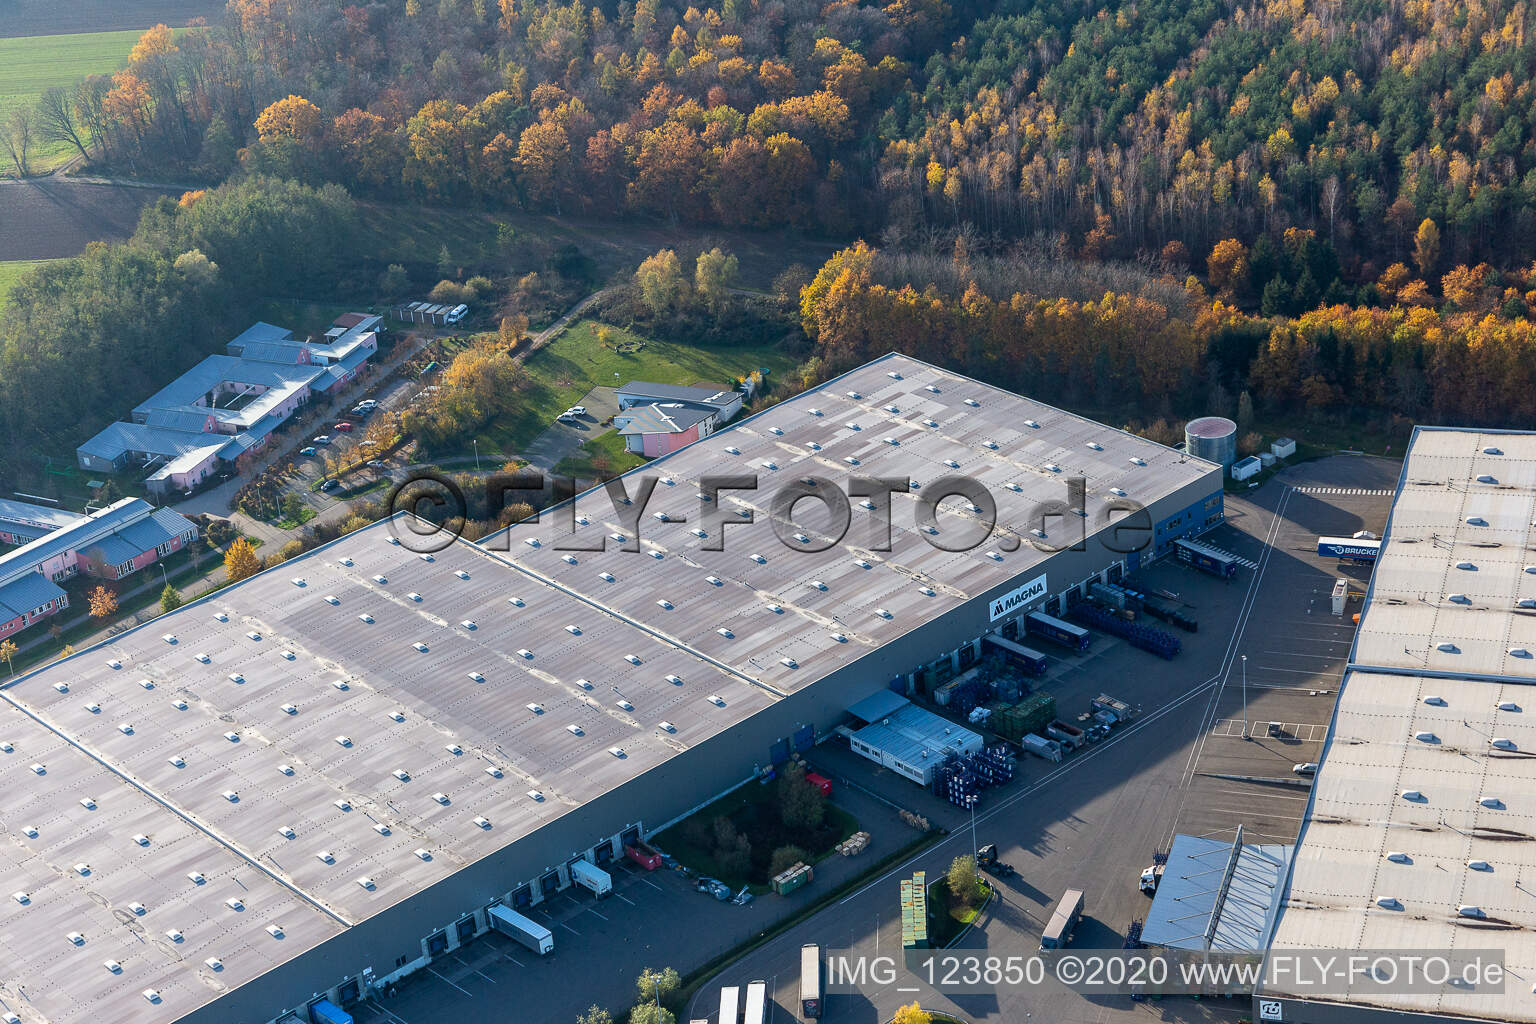 Drone recording of Horst commercial area with Magna Exteriors, Random Logistics, STS Group and Thermo Fisher in the district Minderslachen in Kandel in the state Rhineland-Palatinate, Germany